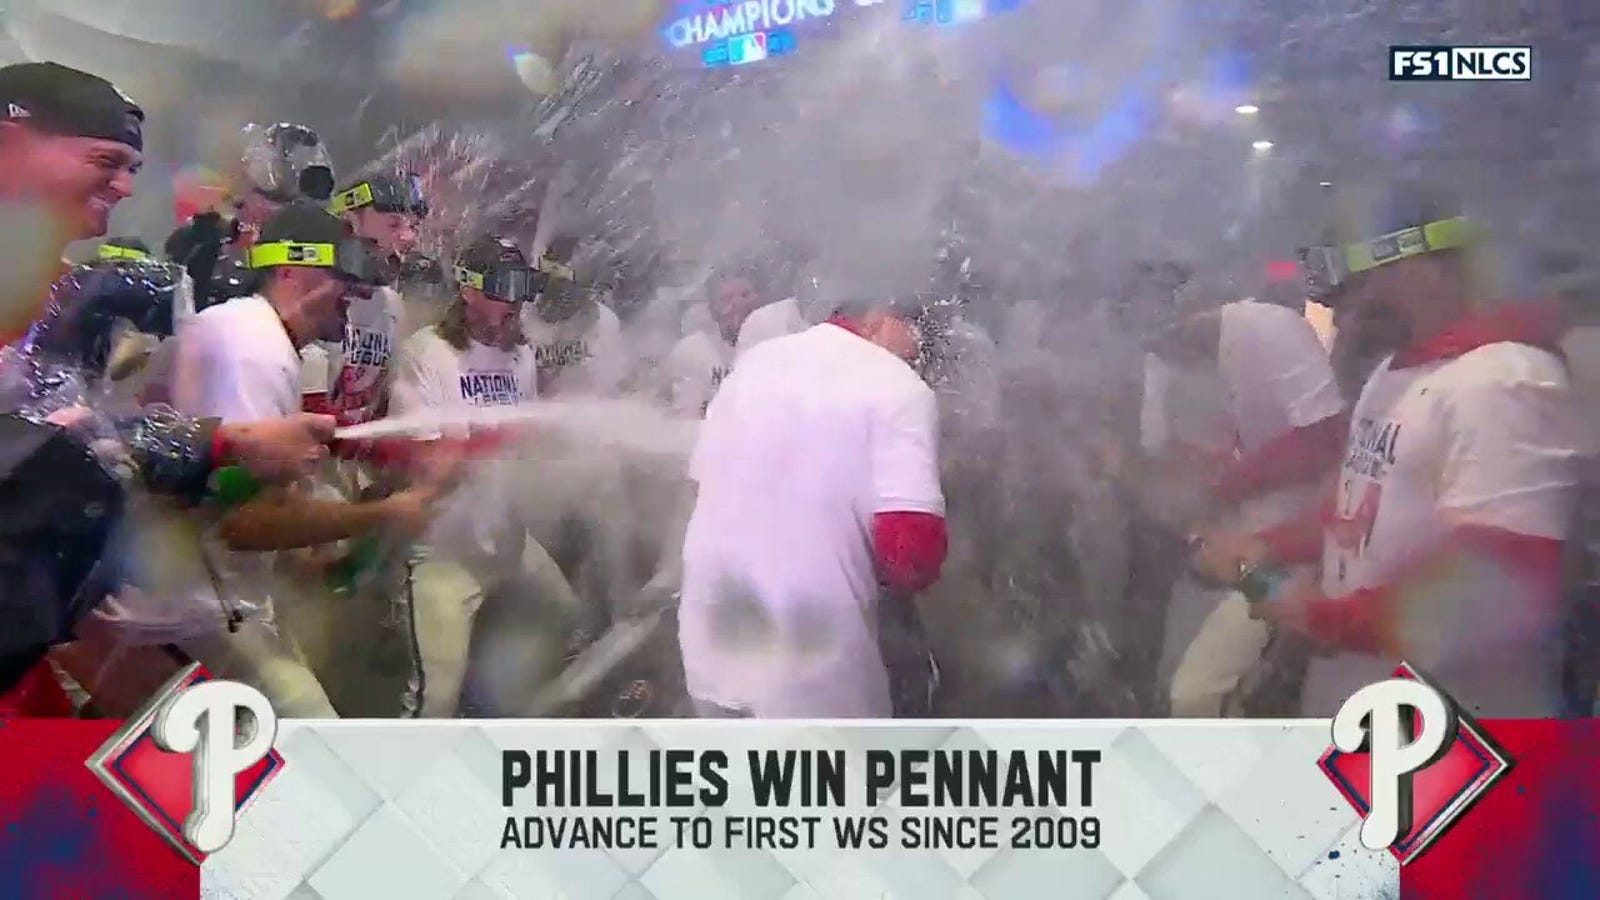 The Phillies celebrate heading to the World Series for first time since 2009